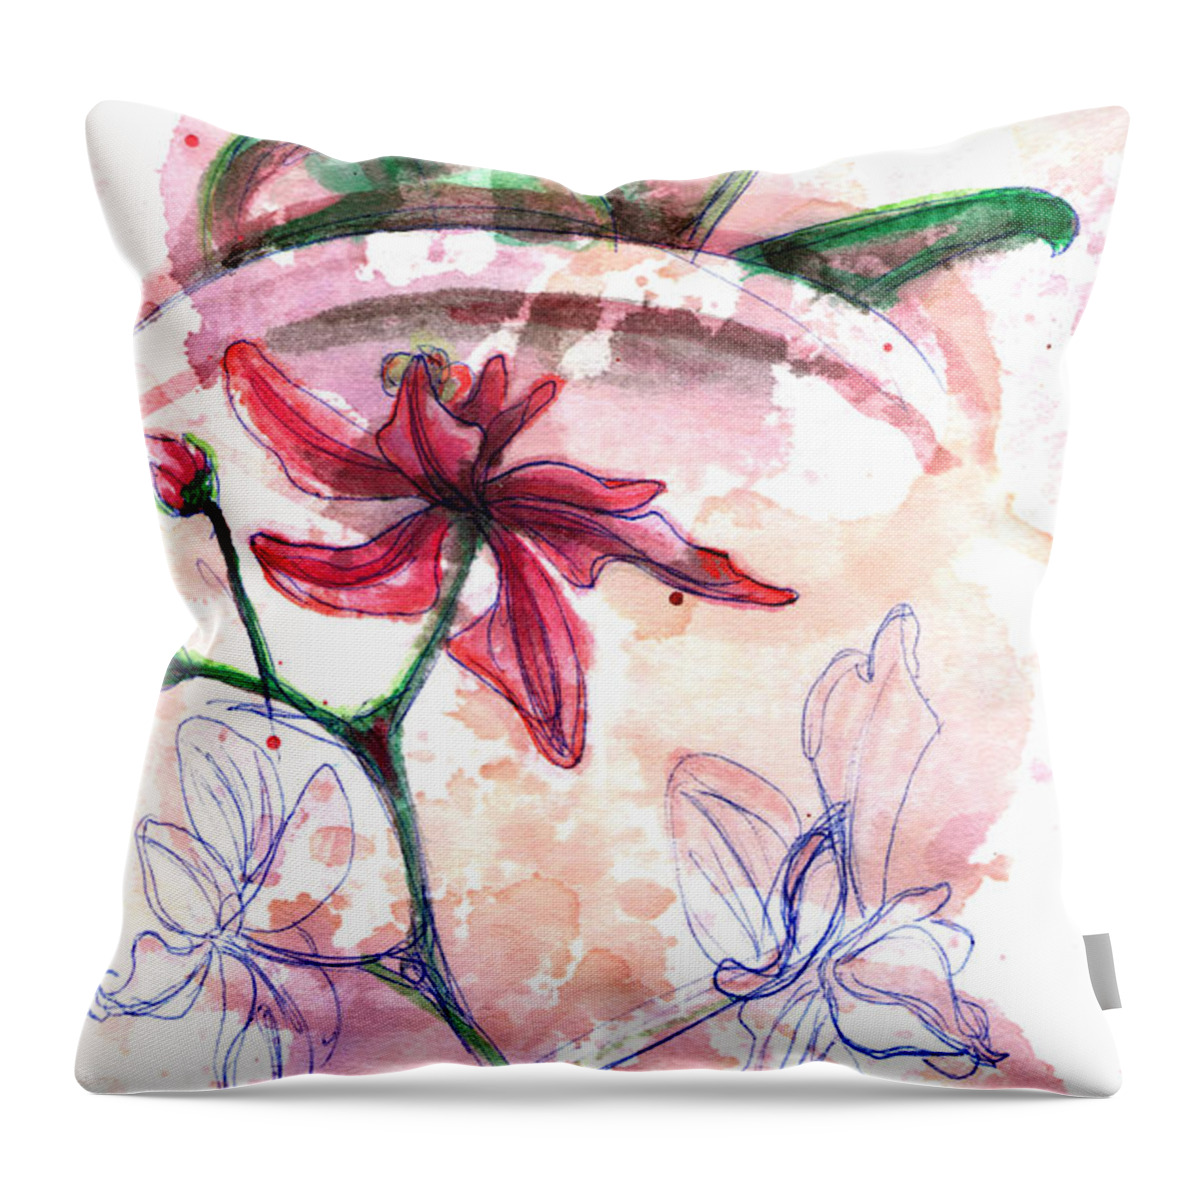 Orchid Art Throw Pillow featuring the painting Shiraz Orchid II by Ashley Kujan